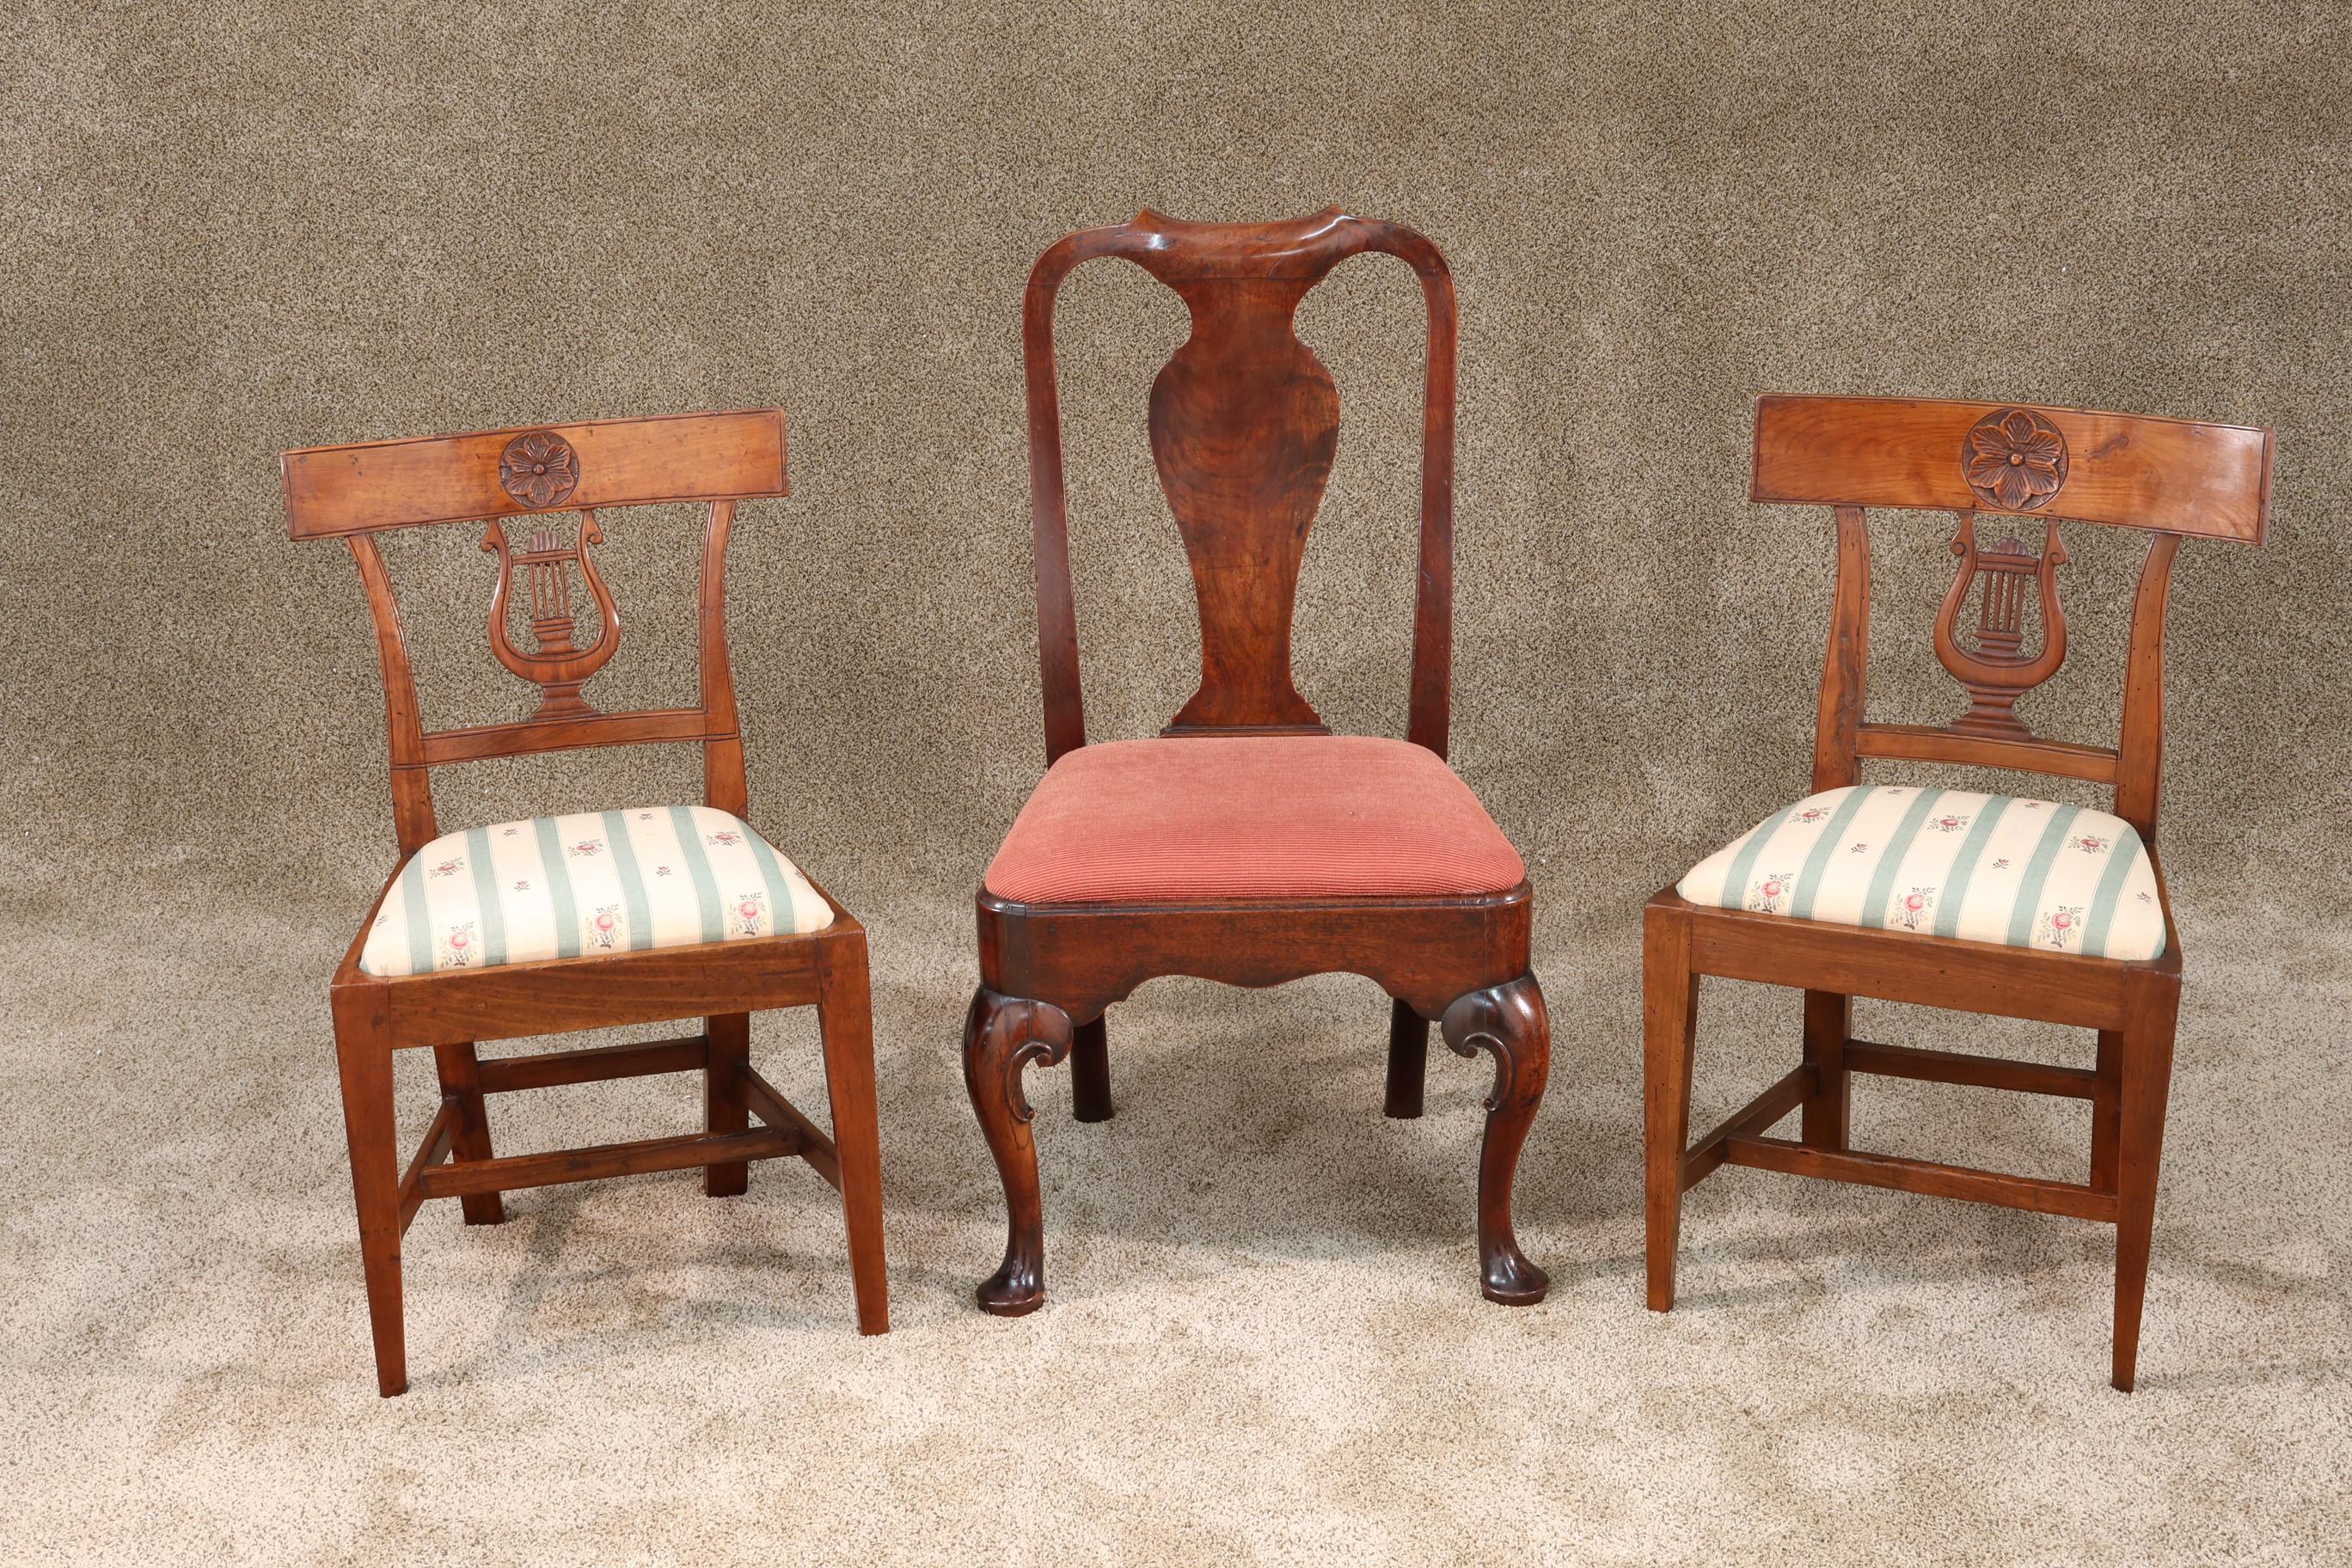 Pair of small antique French walnut side chairs with well carved crest rails and upholstered seats, circa 1850.